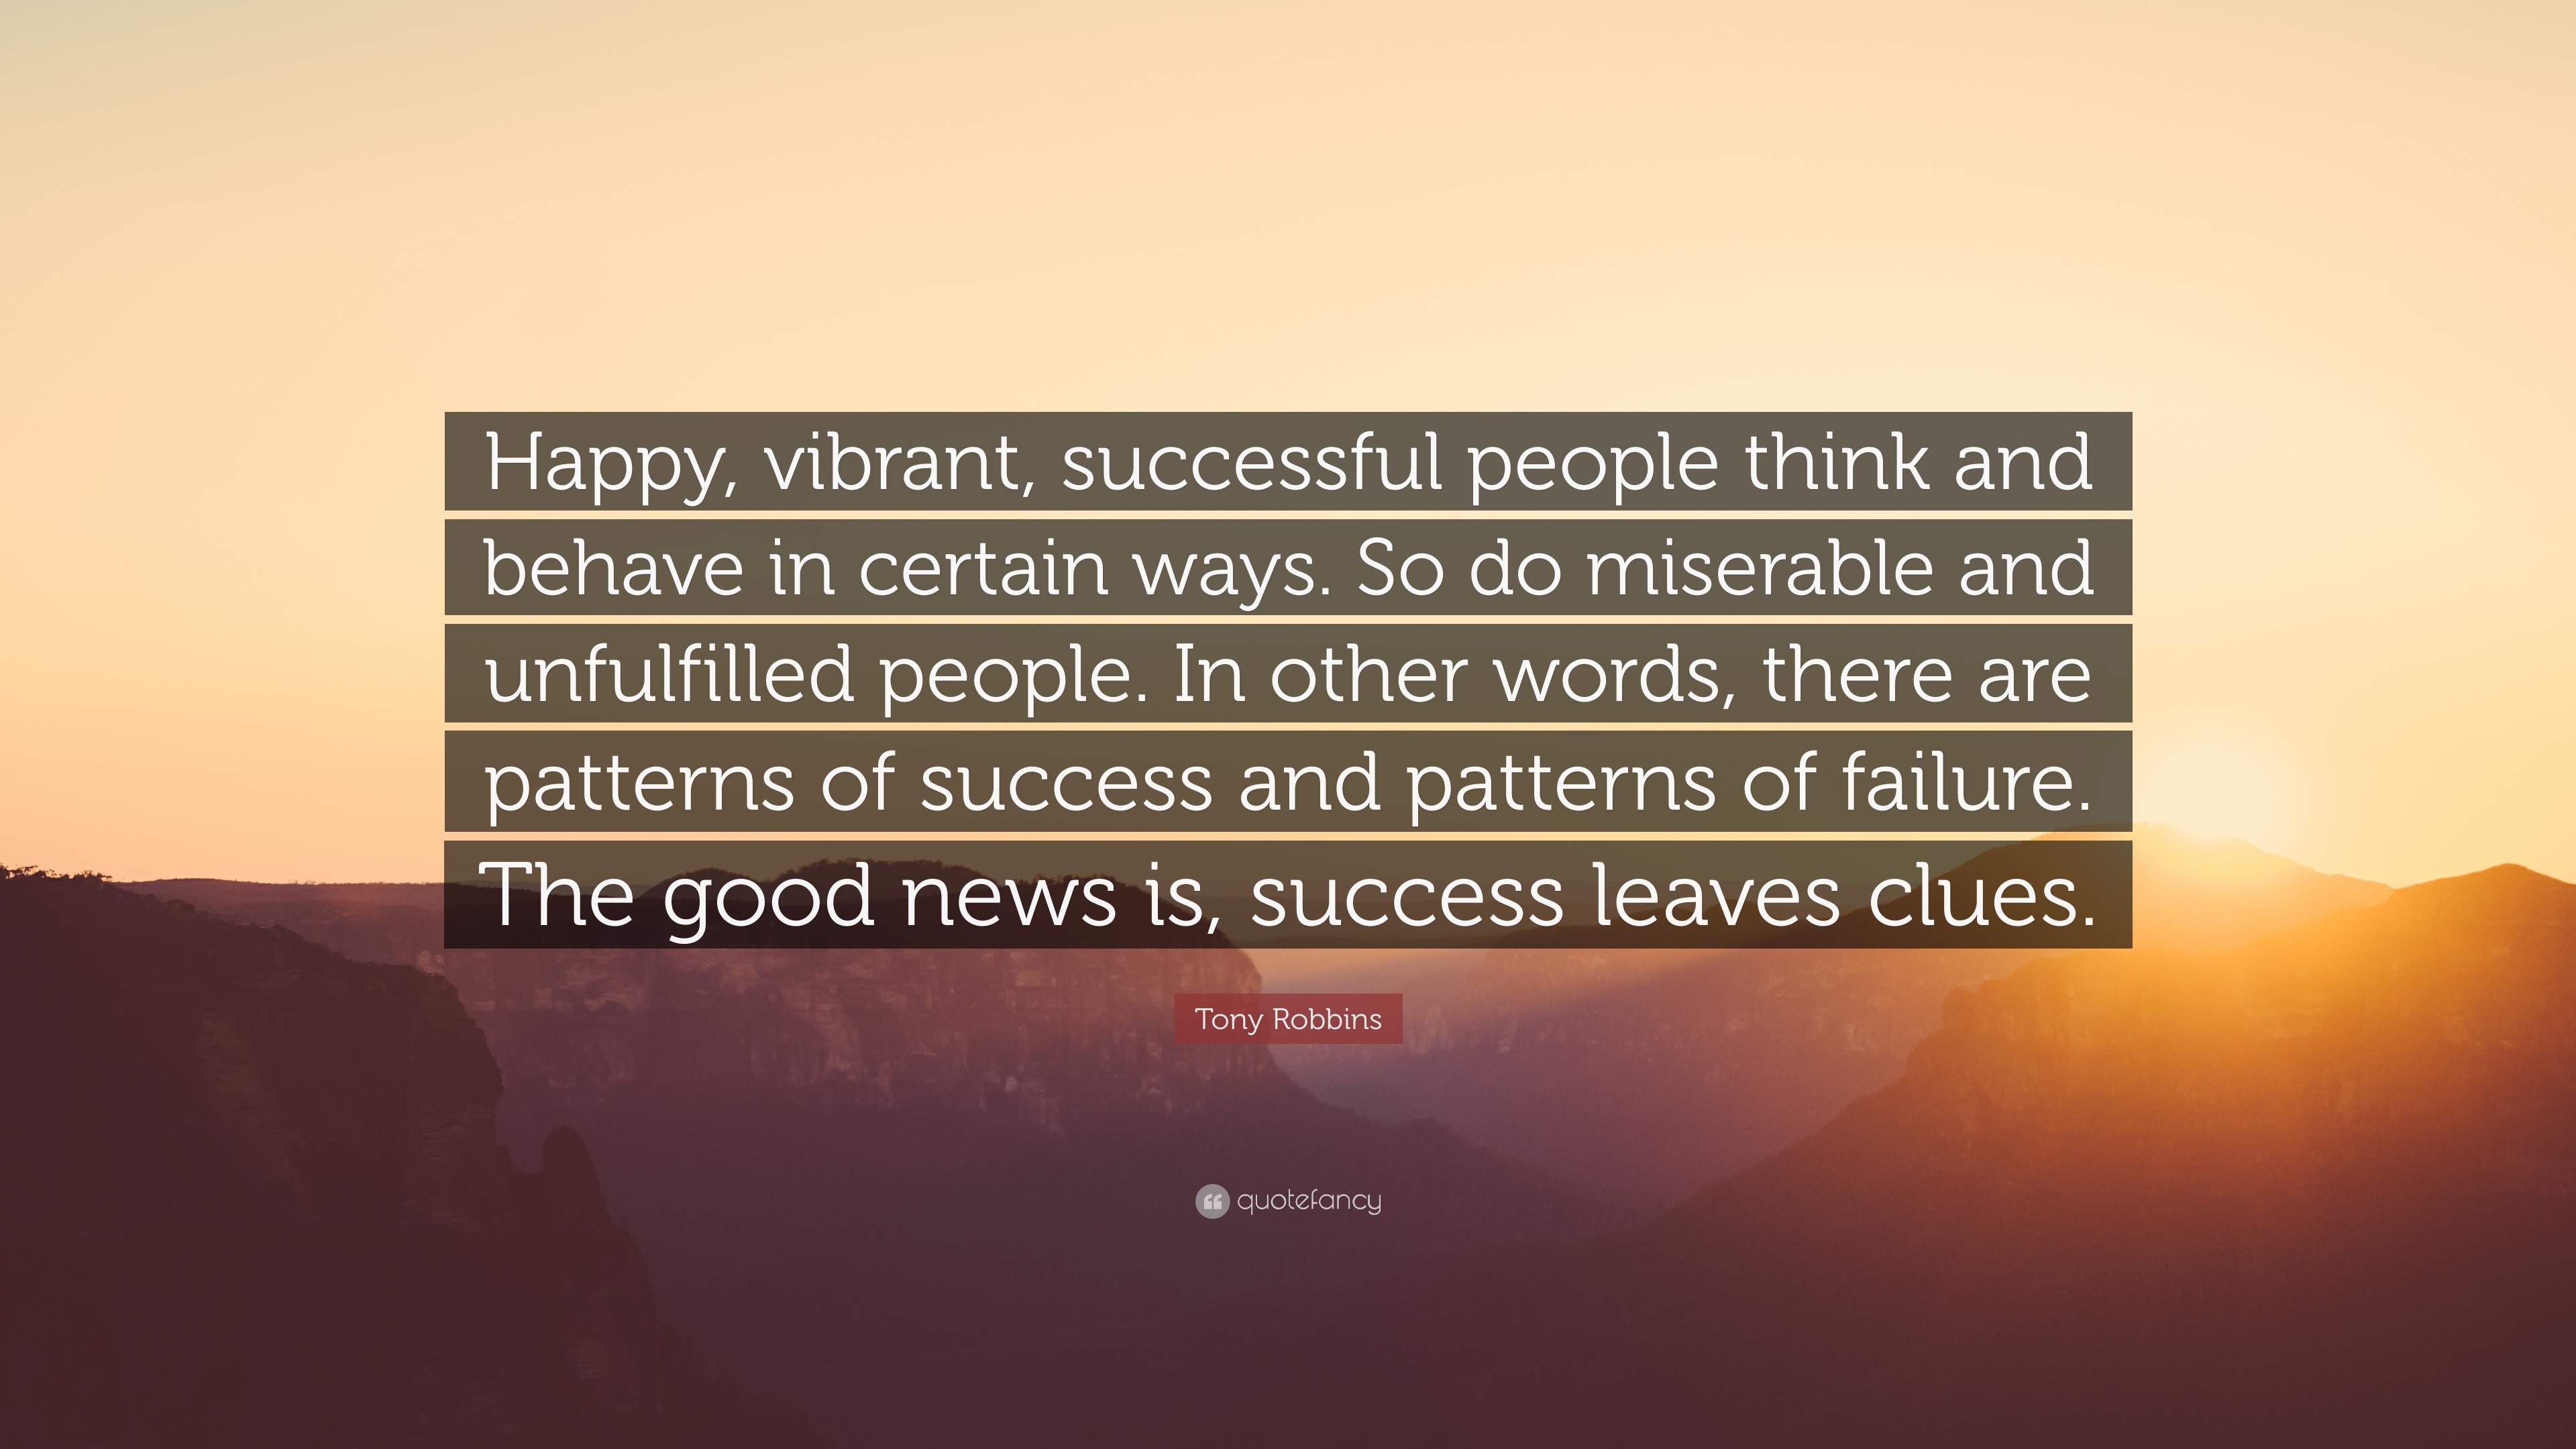 Tony Robbins Quote: “Happy, vibrant, successful people think and behave in  certain ways. So do miserable and unfulfilled people. In other wor”